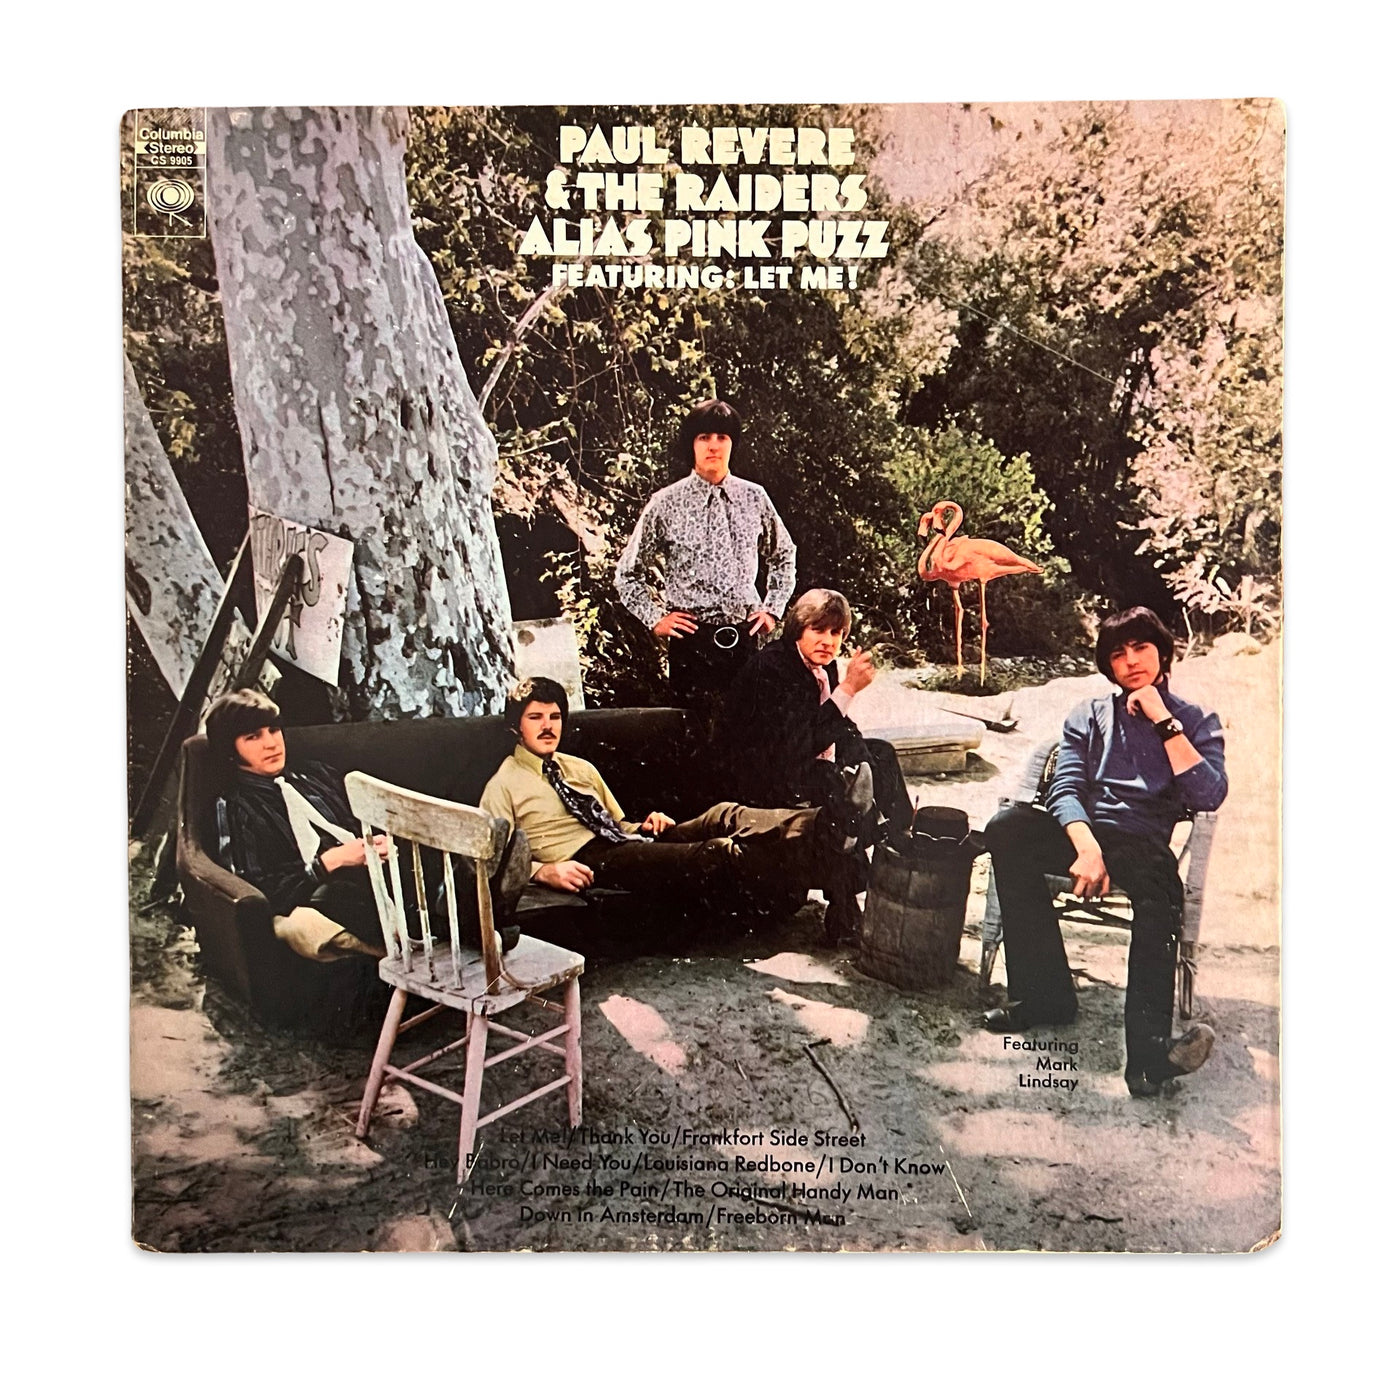 Paul Revere & The Raiders Featuring Mark Lindsay – Alias Pink Puzz